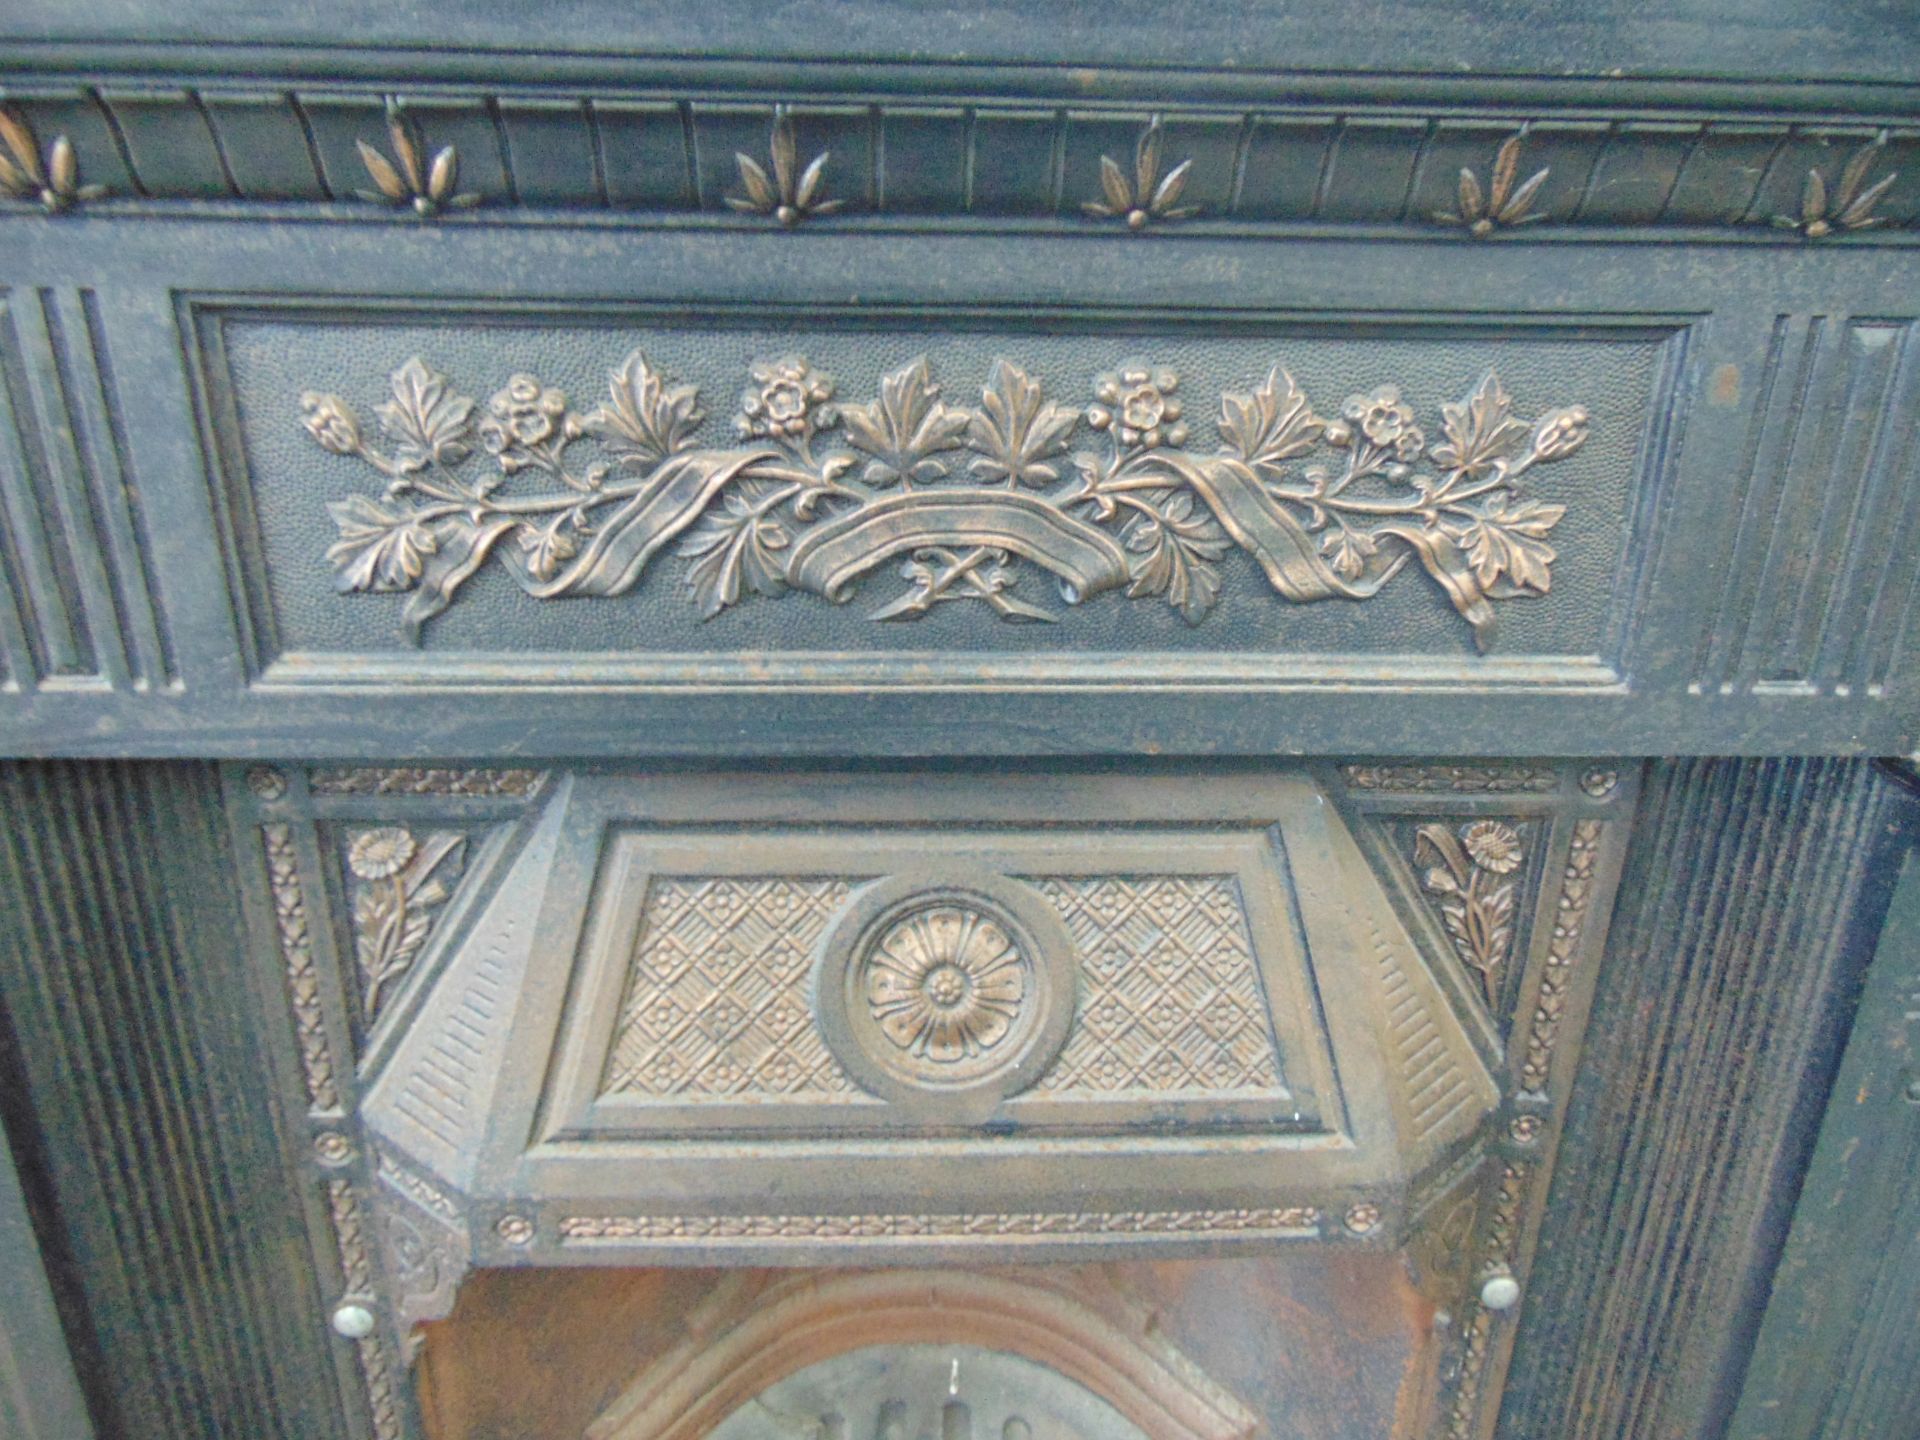 Ornate fire grate and surround X 970MM HIGH / X 800MM WIDE - Image 4 of 5